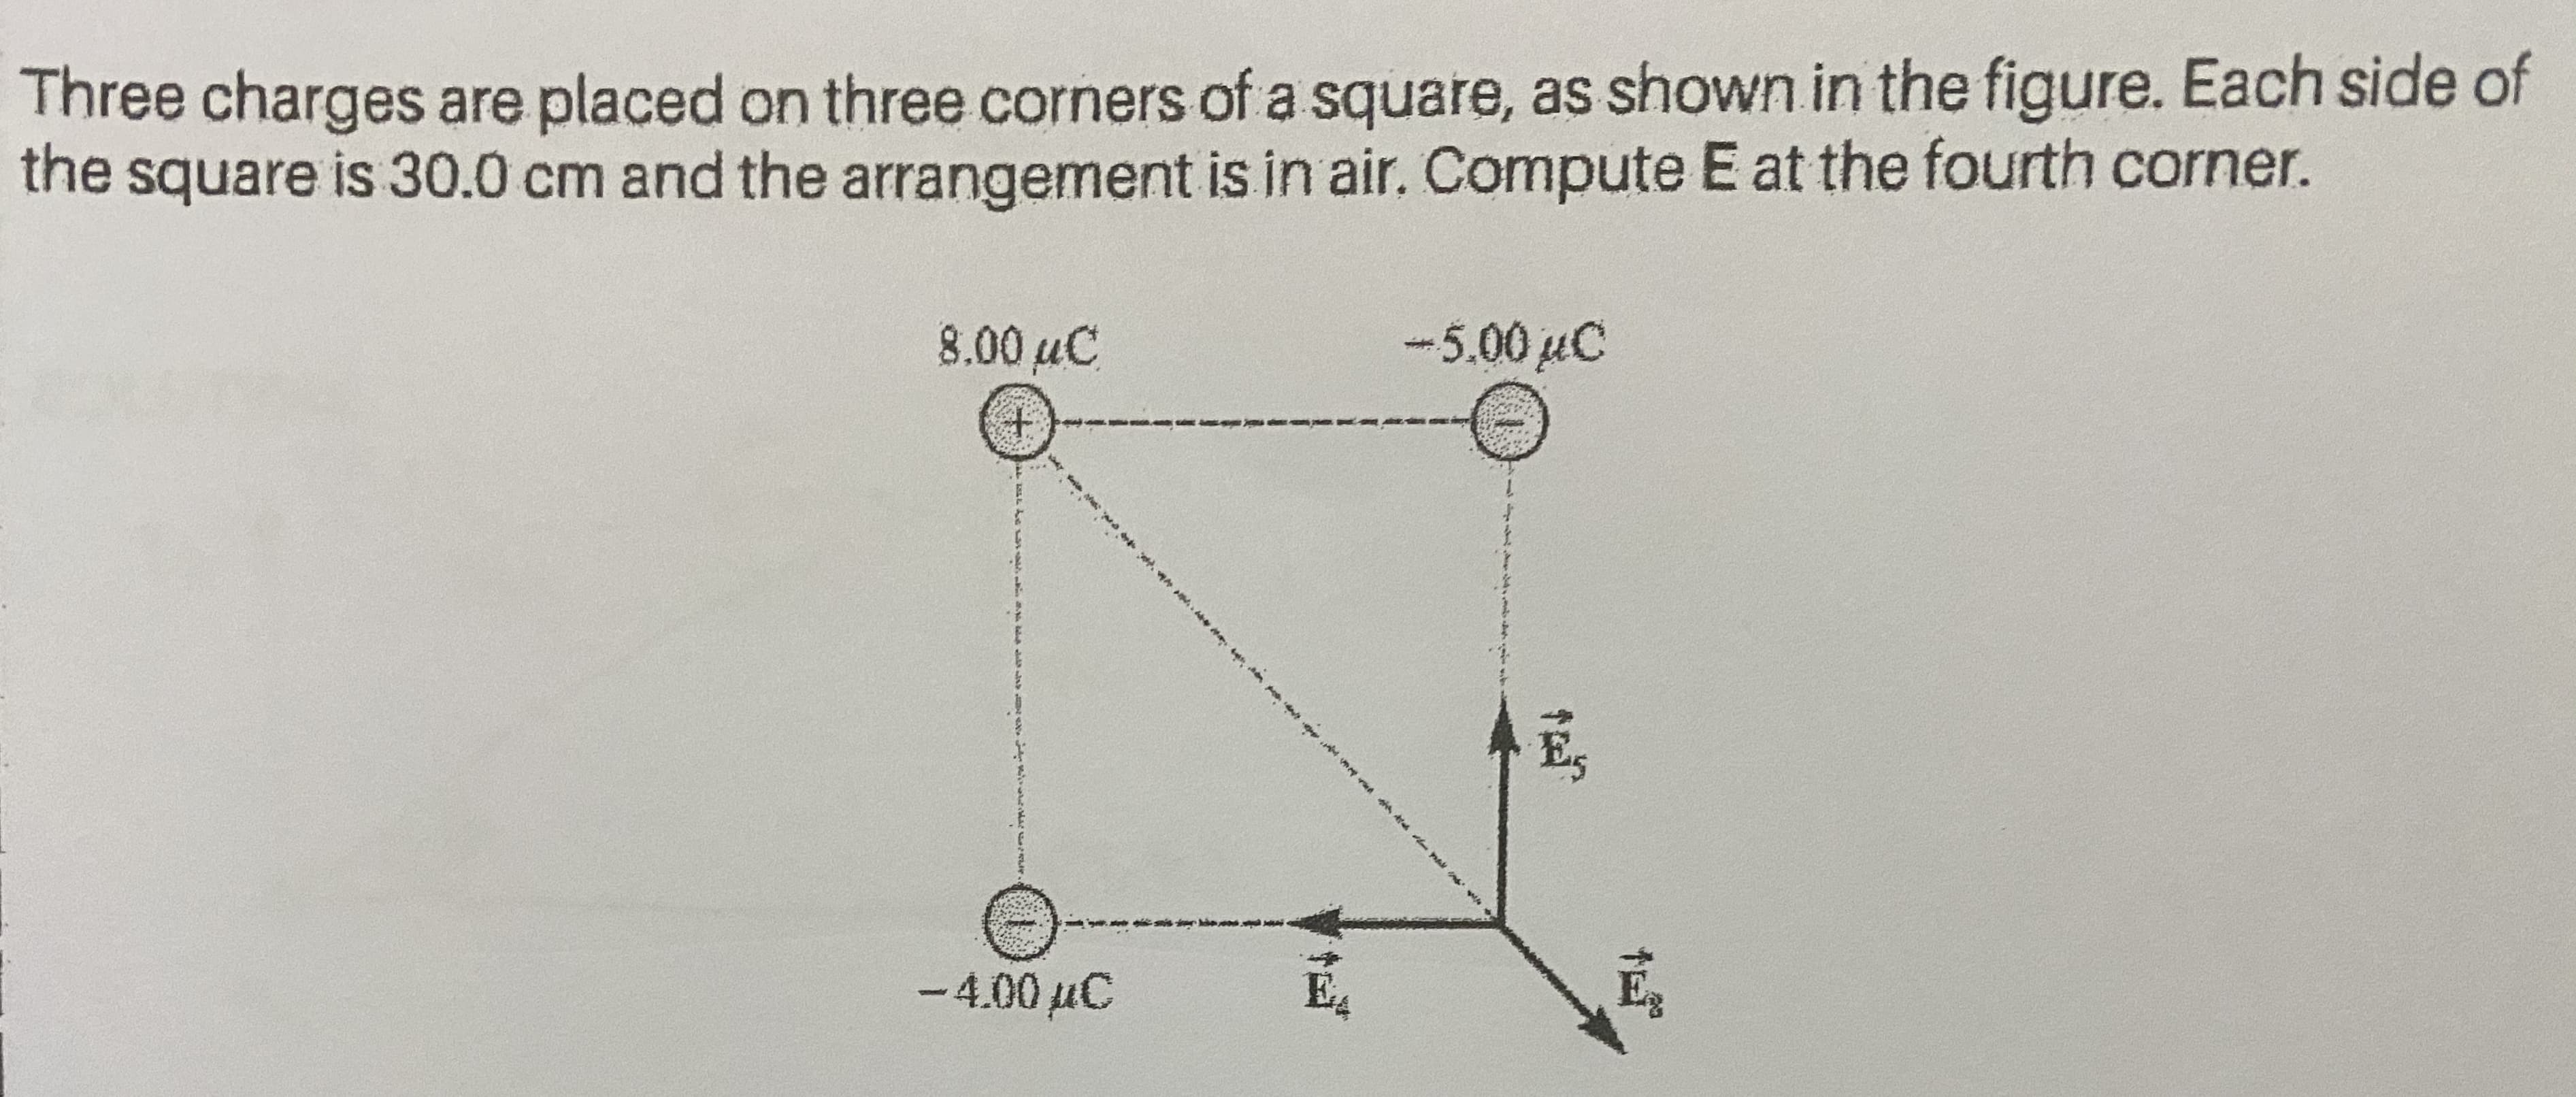 Three charges are placed on three corners of a square, as shown in the figure. Each side of
the square is 30.0 cm and the arrangement is in air. Compute E at the fourth corner.
8.00 uC
-5.00 µC
-4.00µC
E4
